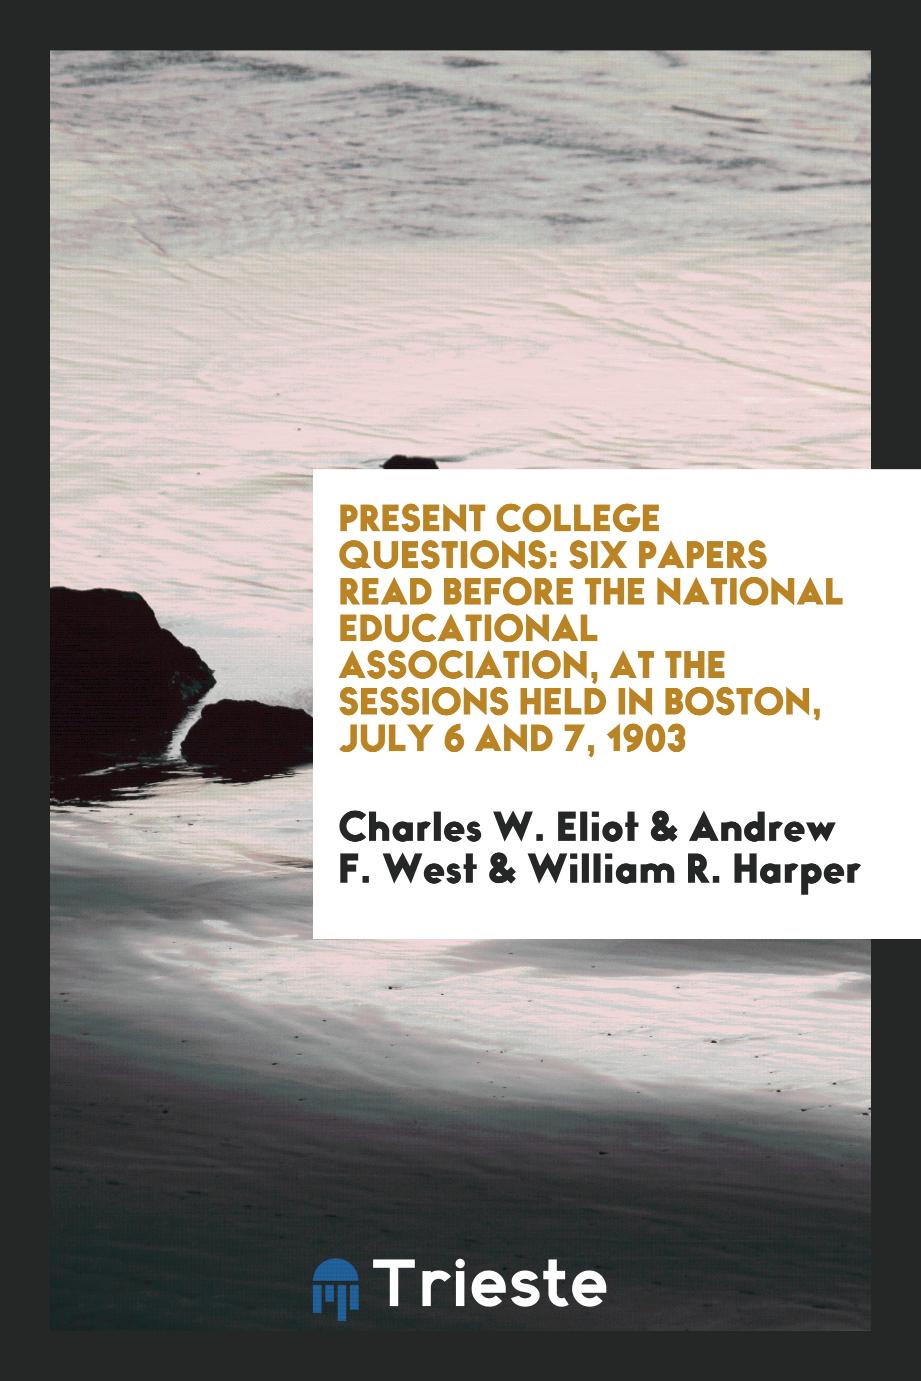 Present College Questions: Six Papers Read Before the National Educational Association, at the Sessions Held in Boston, July 6 and 7, 1903